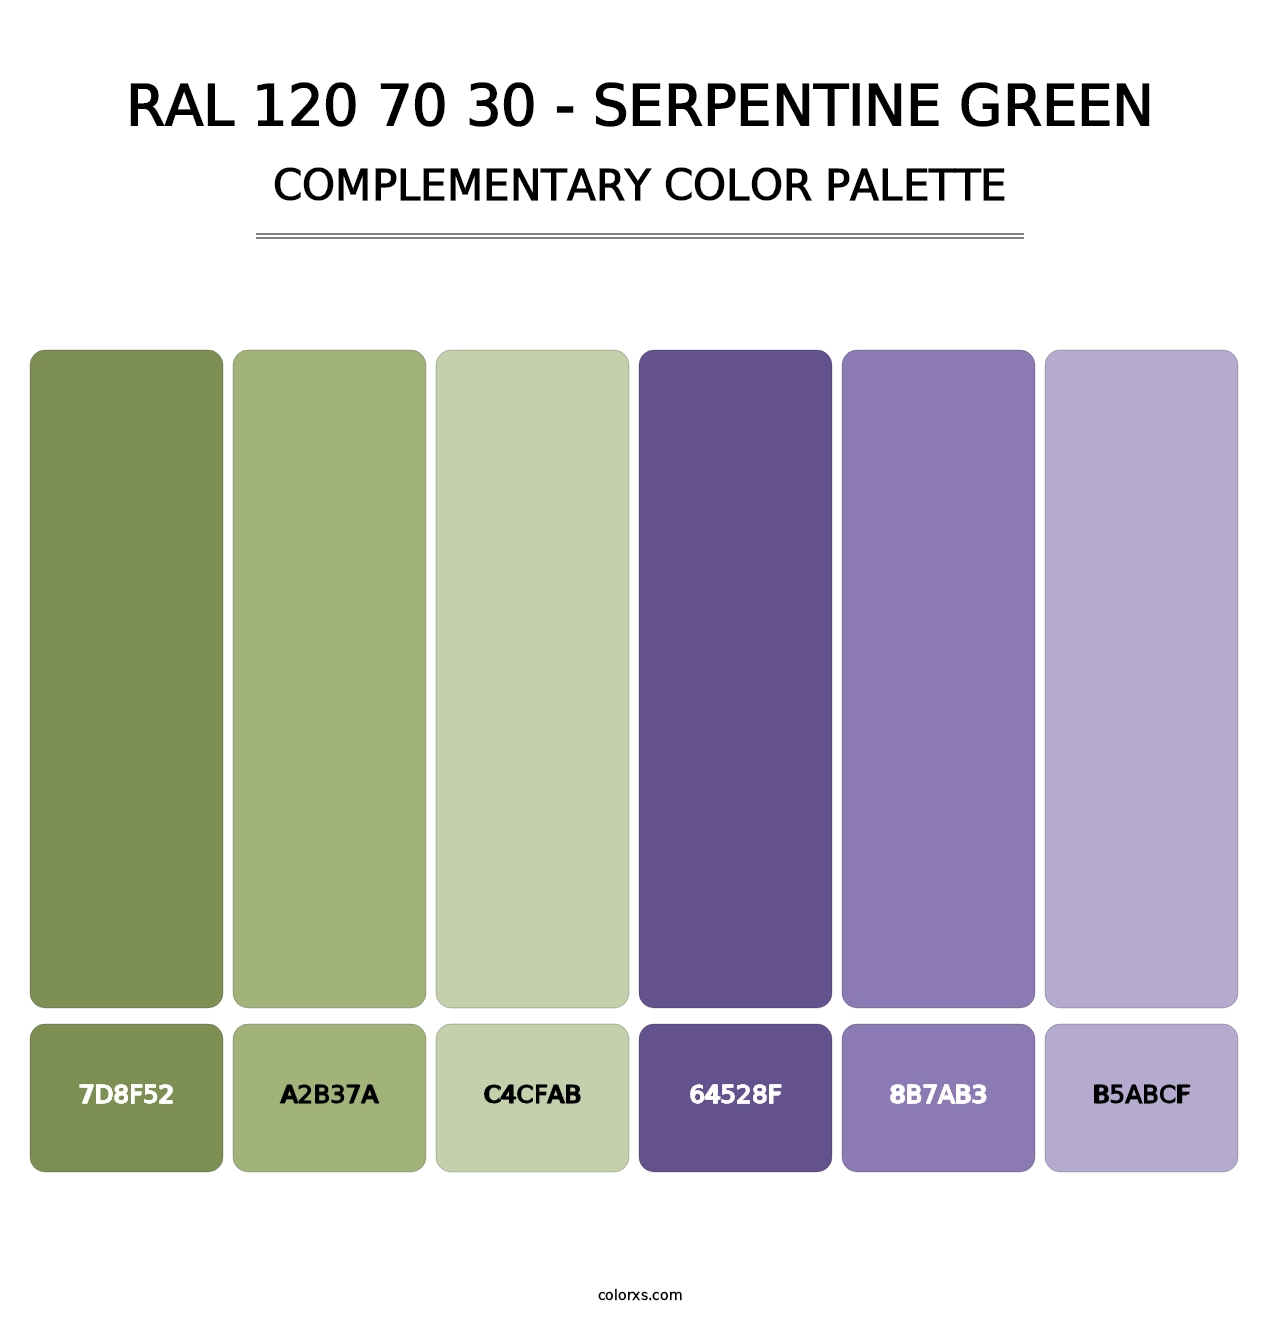 RAL 120 70 30 - Serpentine Green - Complementary Color Palette